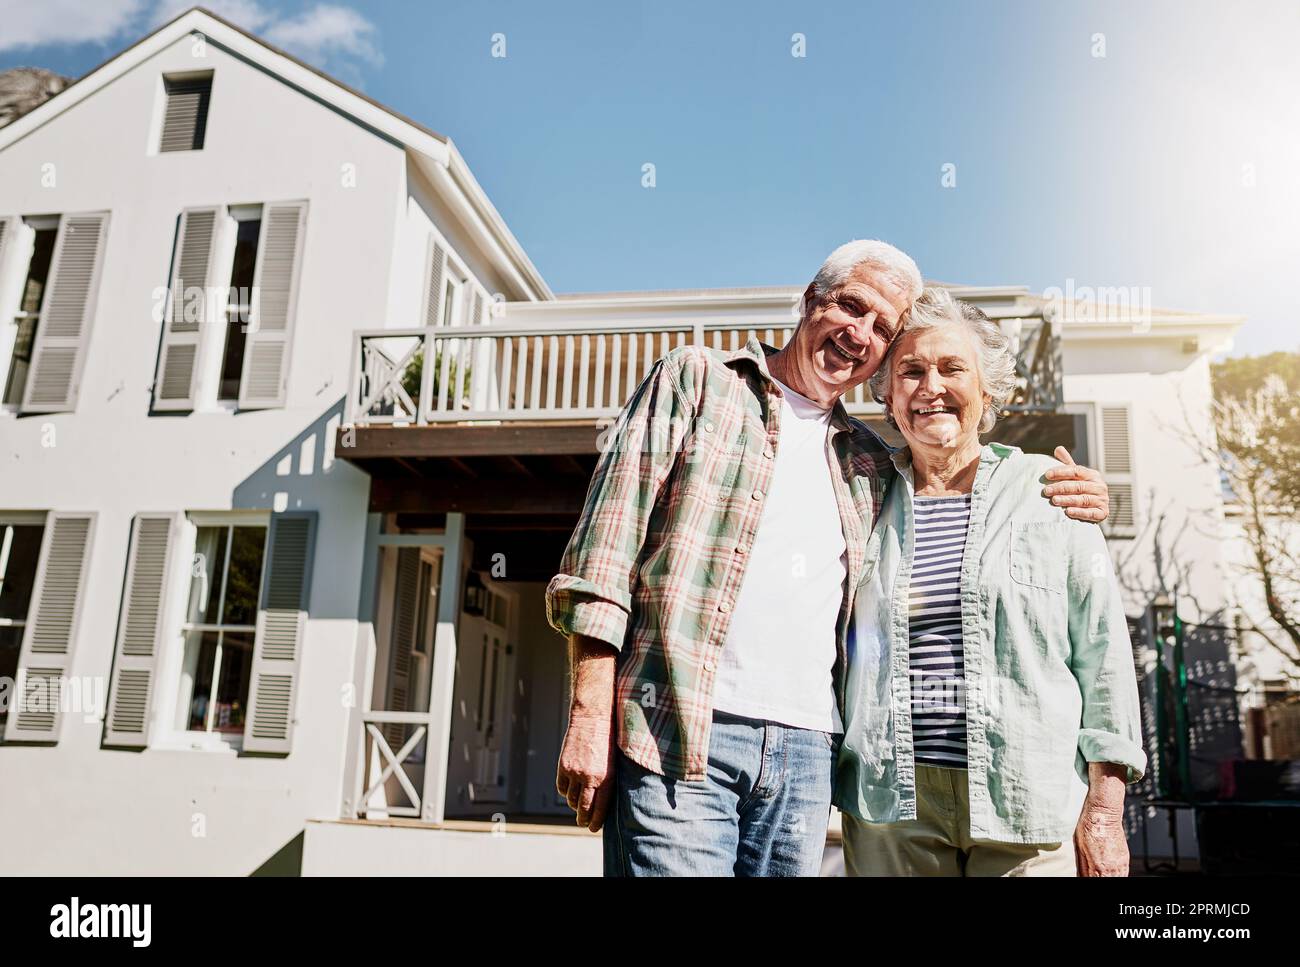 We bought our dream retirement home. a happy senior couple standing together in front of their house. Stock Photo